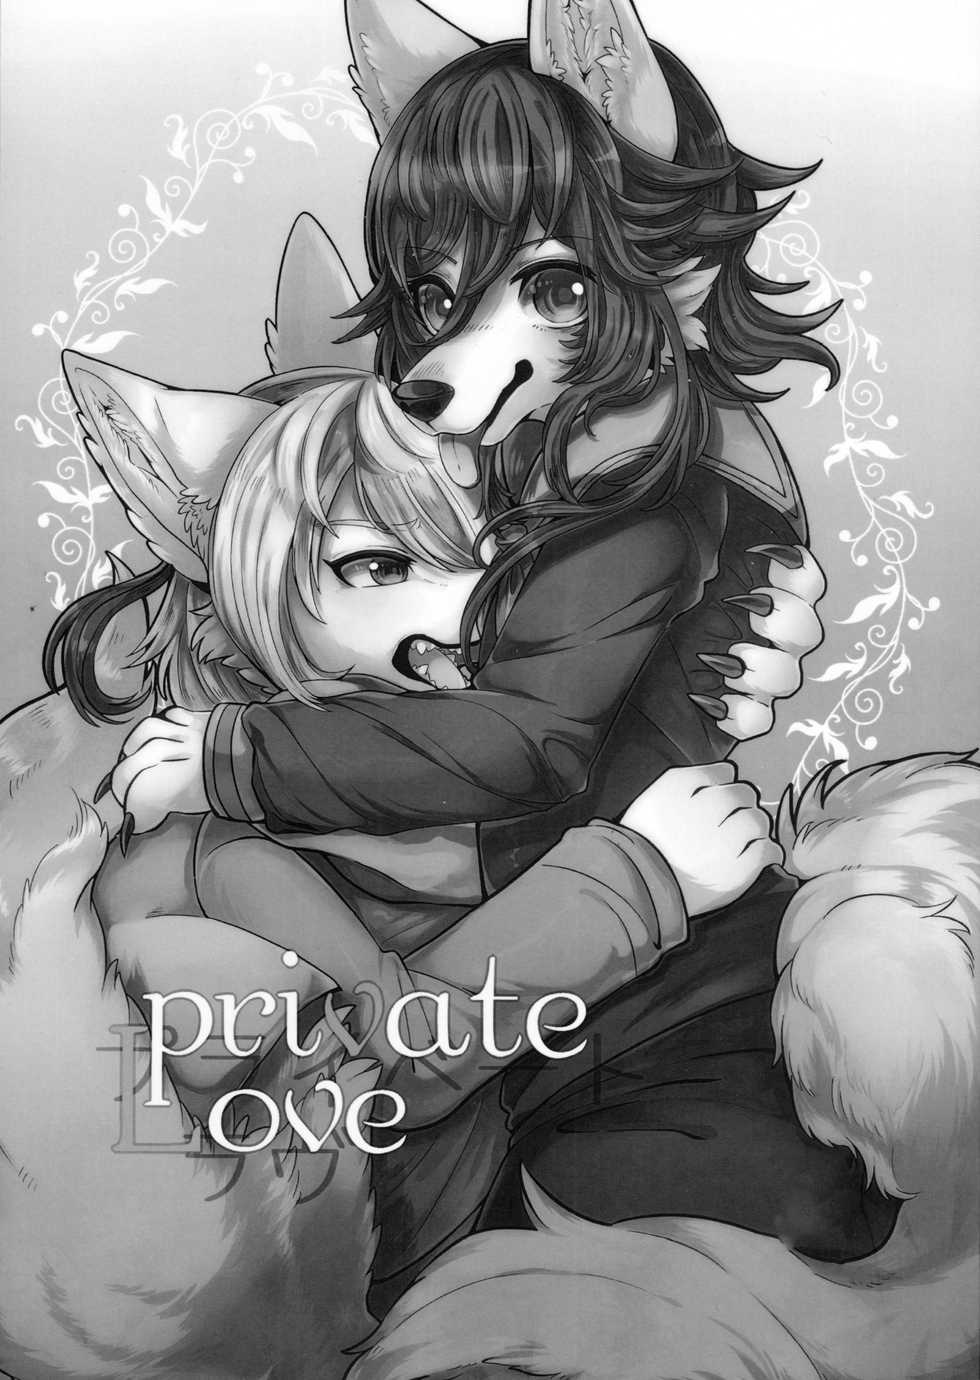 (Kemoket 6) [Lomelette (Lassie, RNG)] Private Love [English] [Decensored] - Page 2